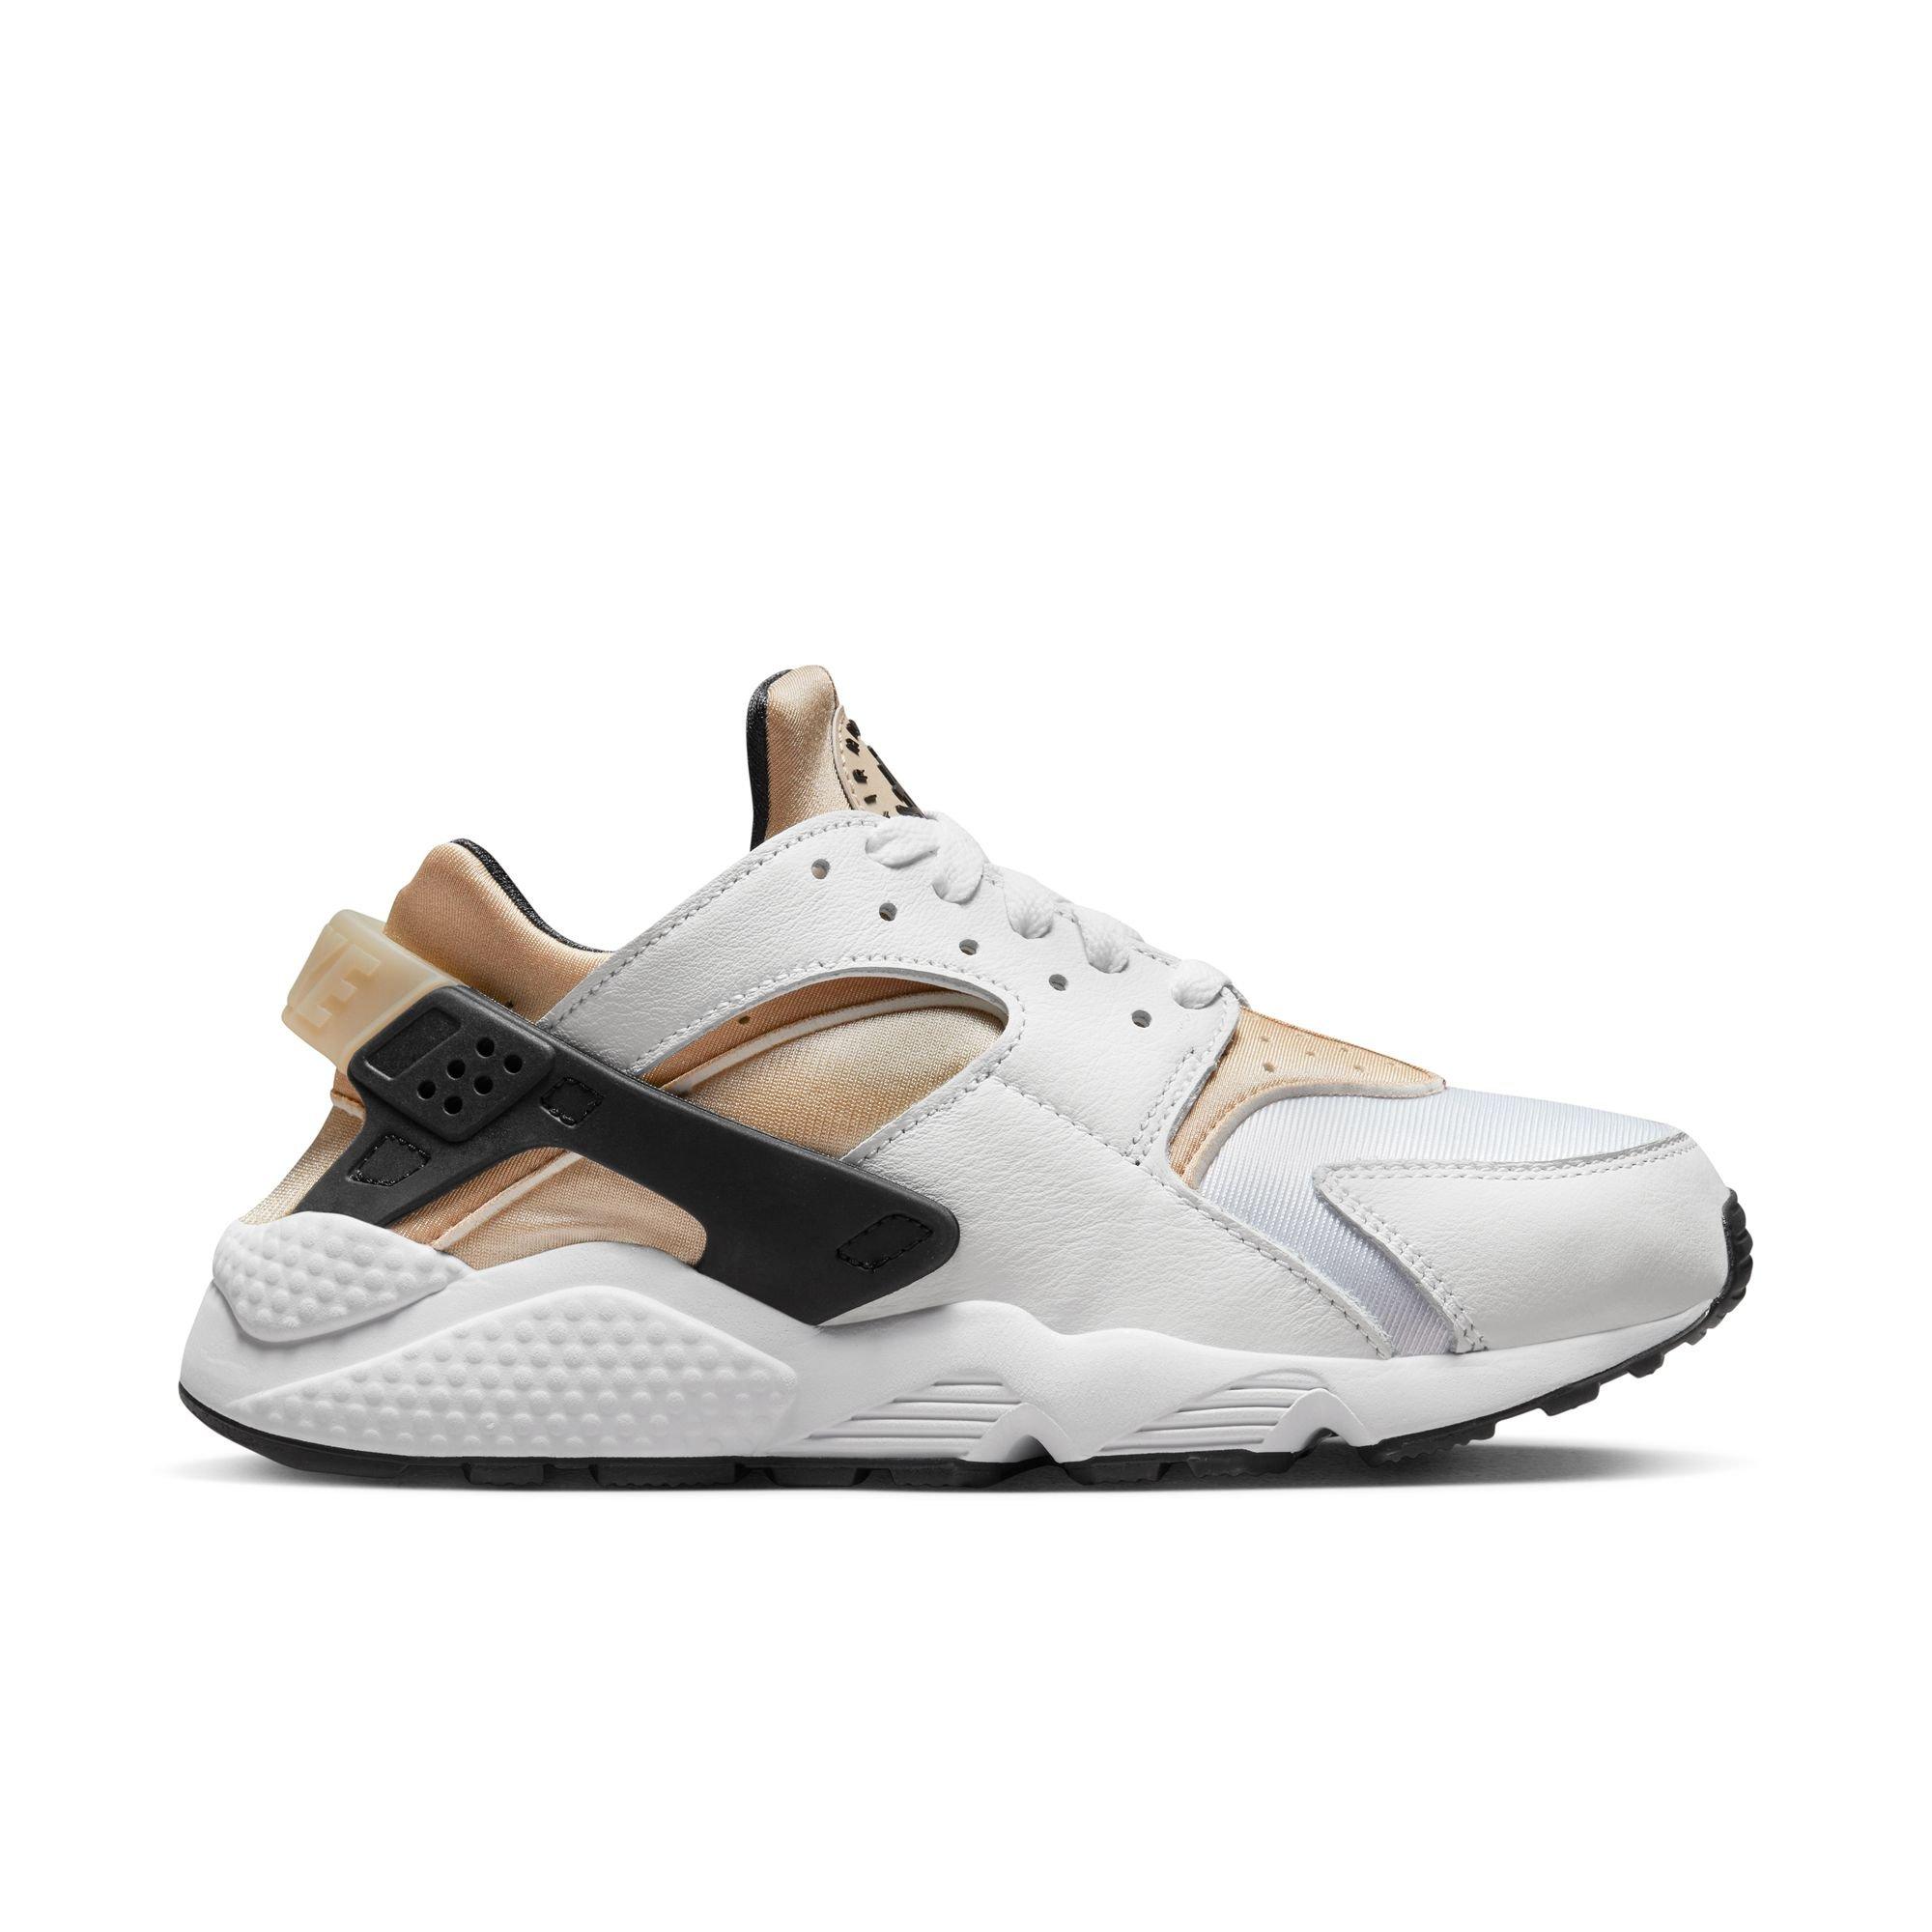 outfits to wear with white huaraches